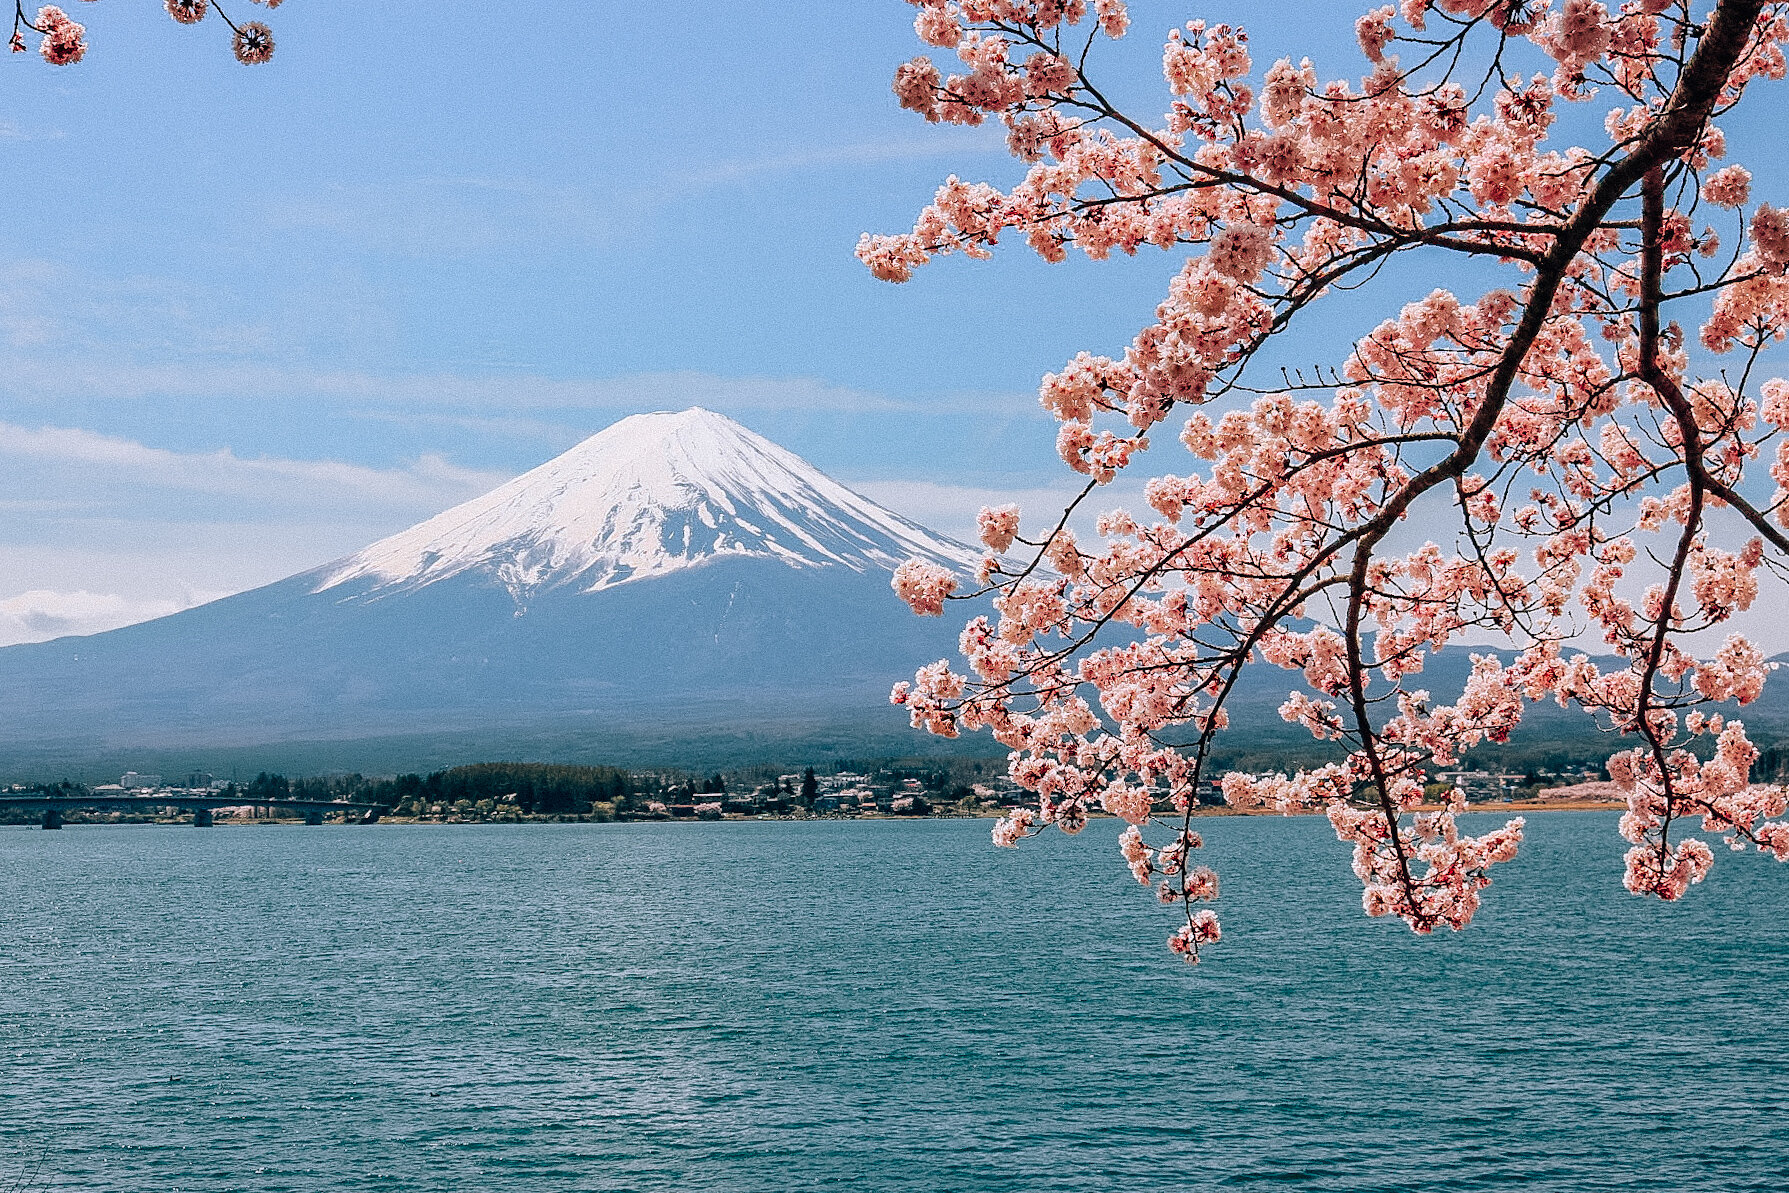 A pink cherry blossom tree with a lake leading up to the snow topped Mt. Fuji in the distance